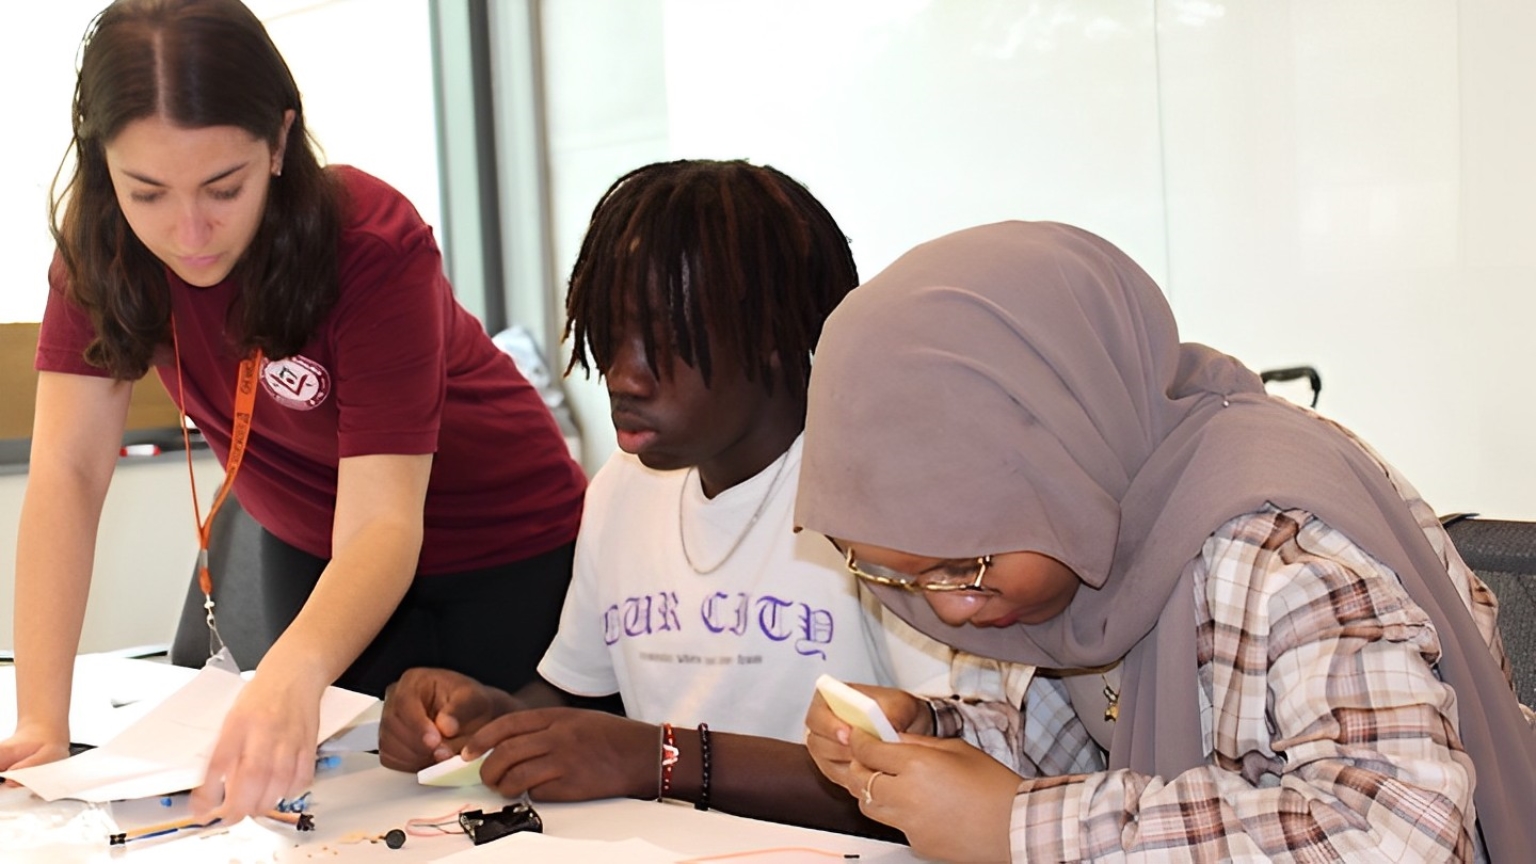 A Venture staff members supports two Black students on a STEM activity